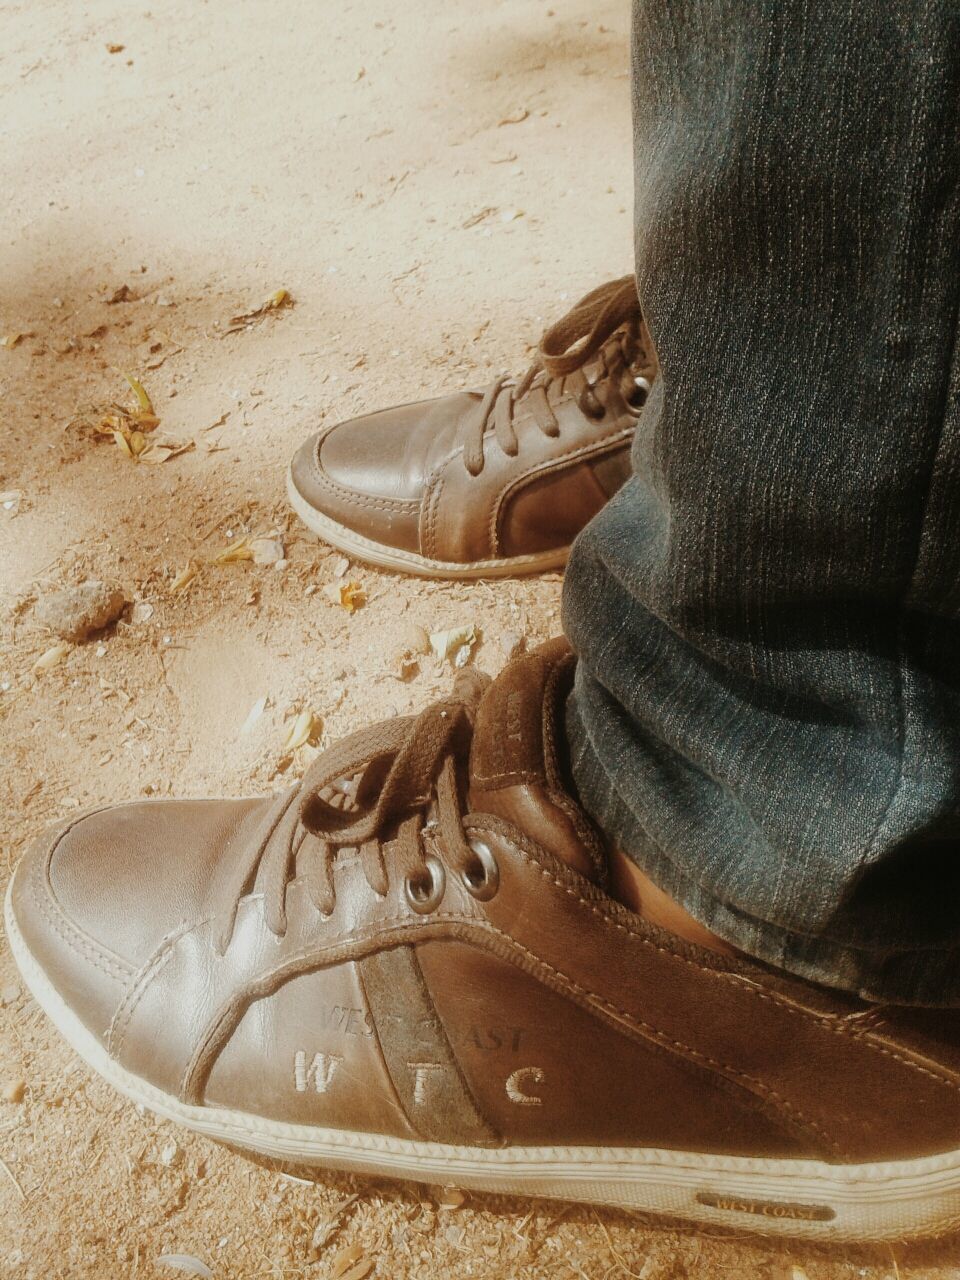 shoe, low section, high angle view, person, sand, jeans, footwear, close-up, indoors, part of, pair, human foot, dirty, beach, sunlight, day, men